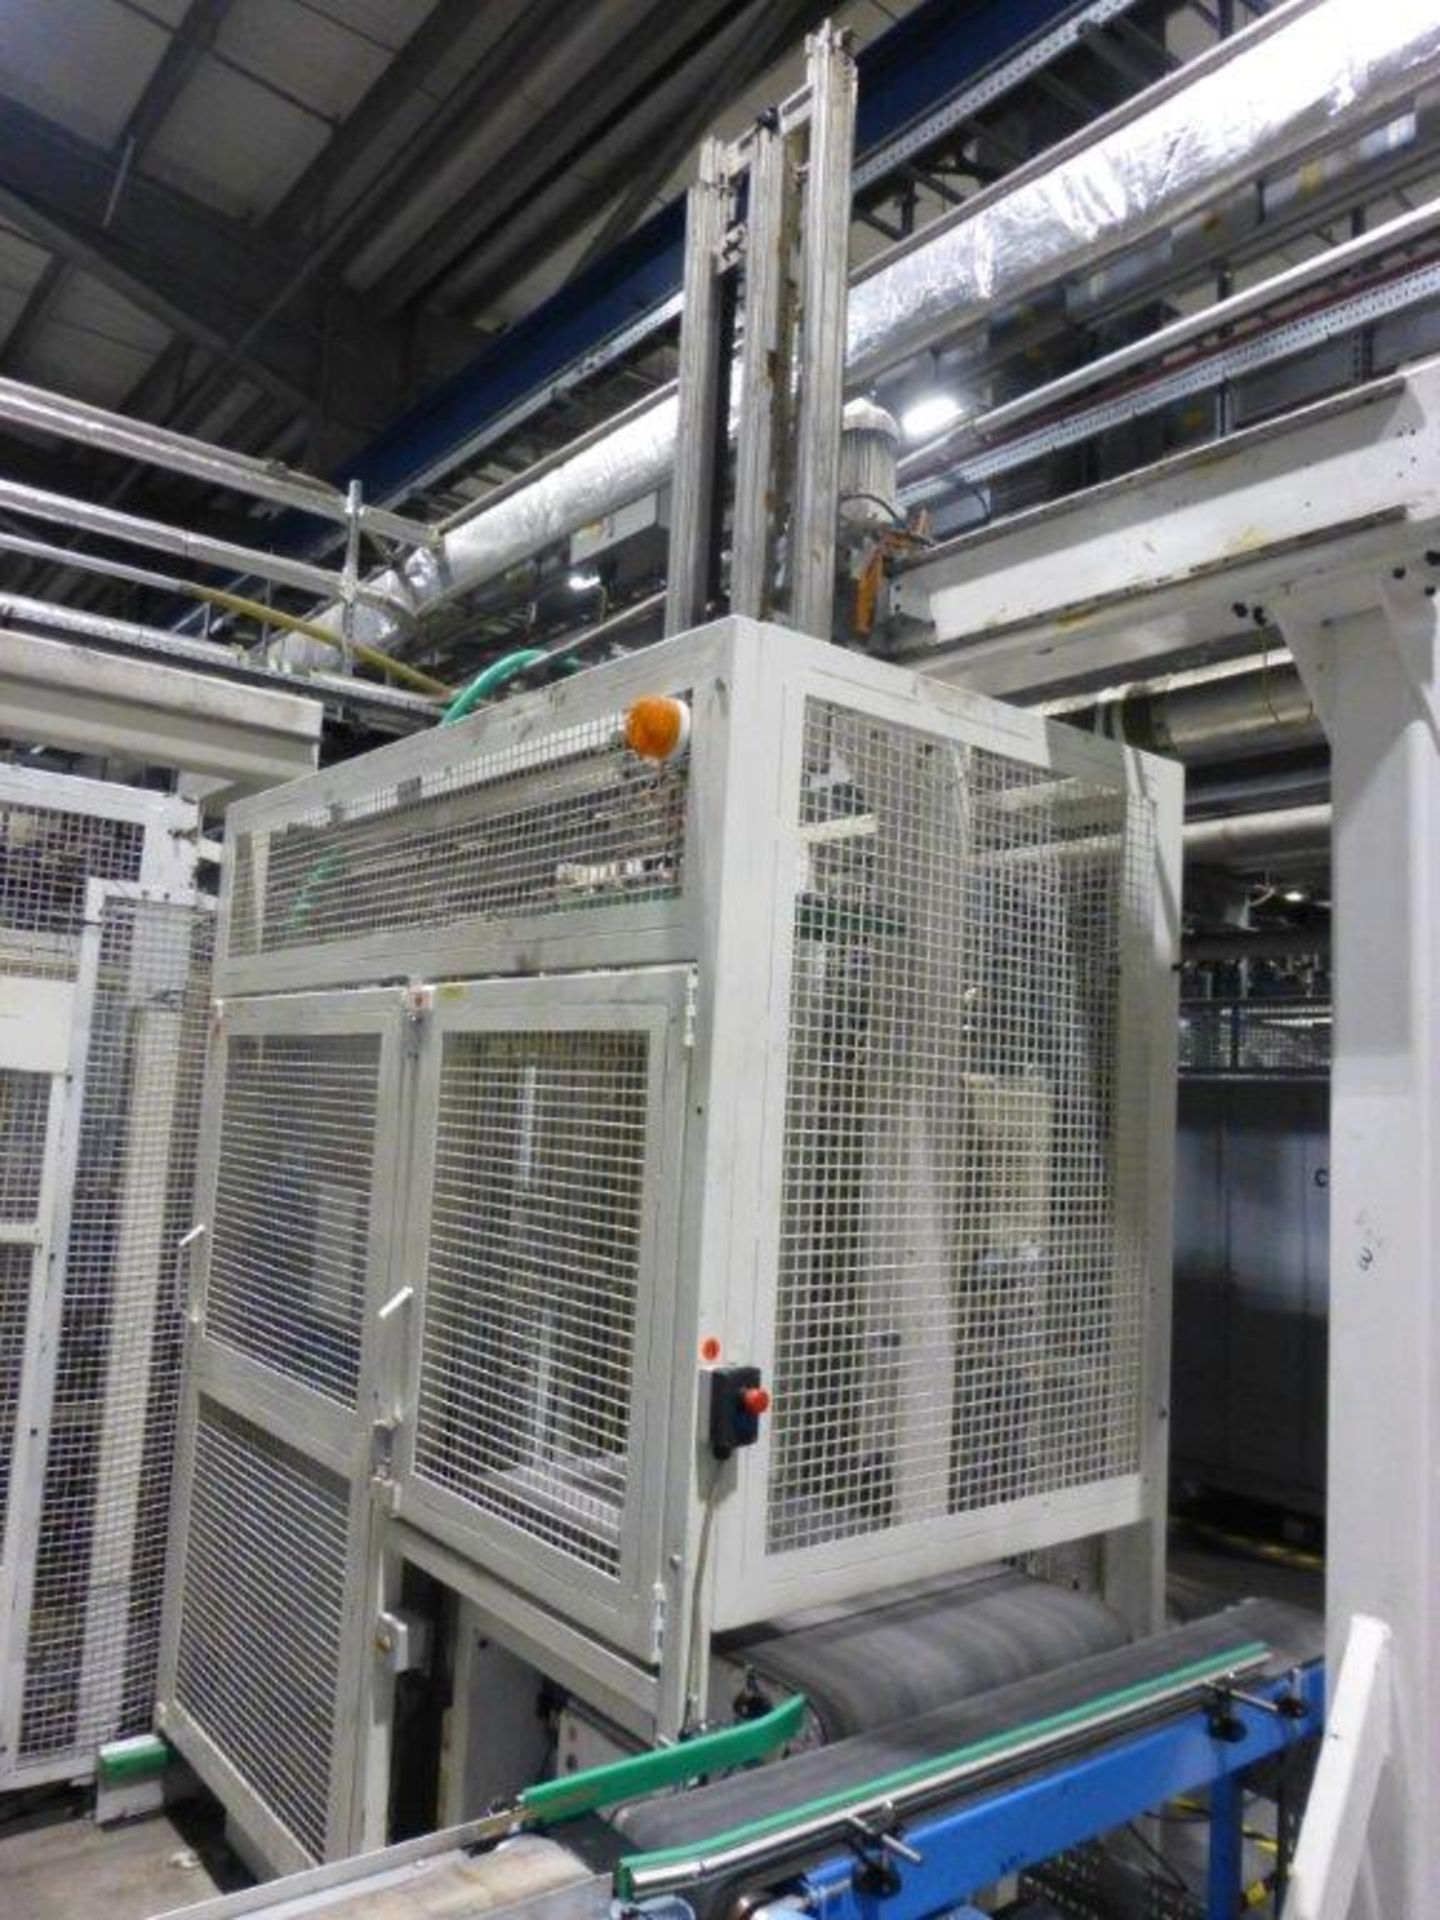 GMAT Model M53 CNC automated DVD case twin arm picking/stacking system with case closure unit, - Image 4 of 8